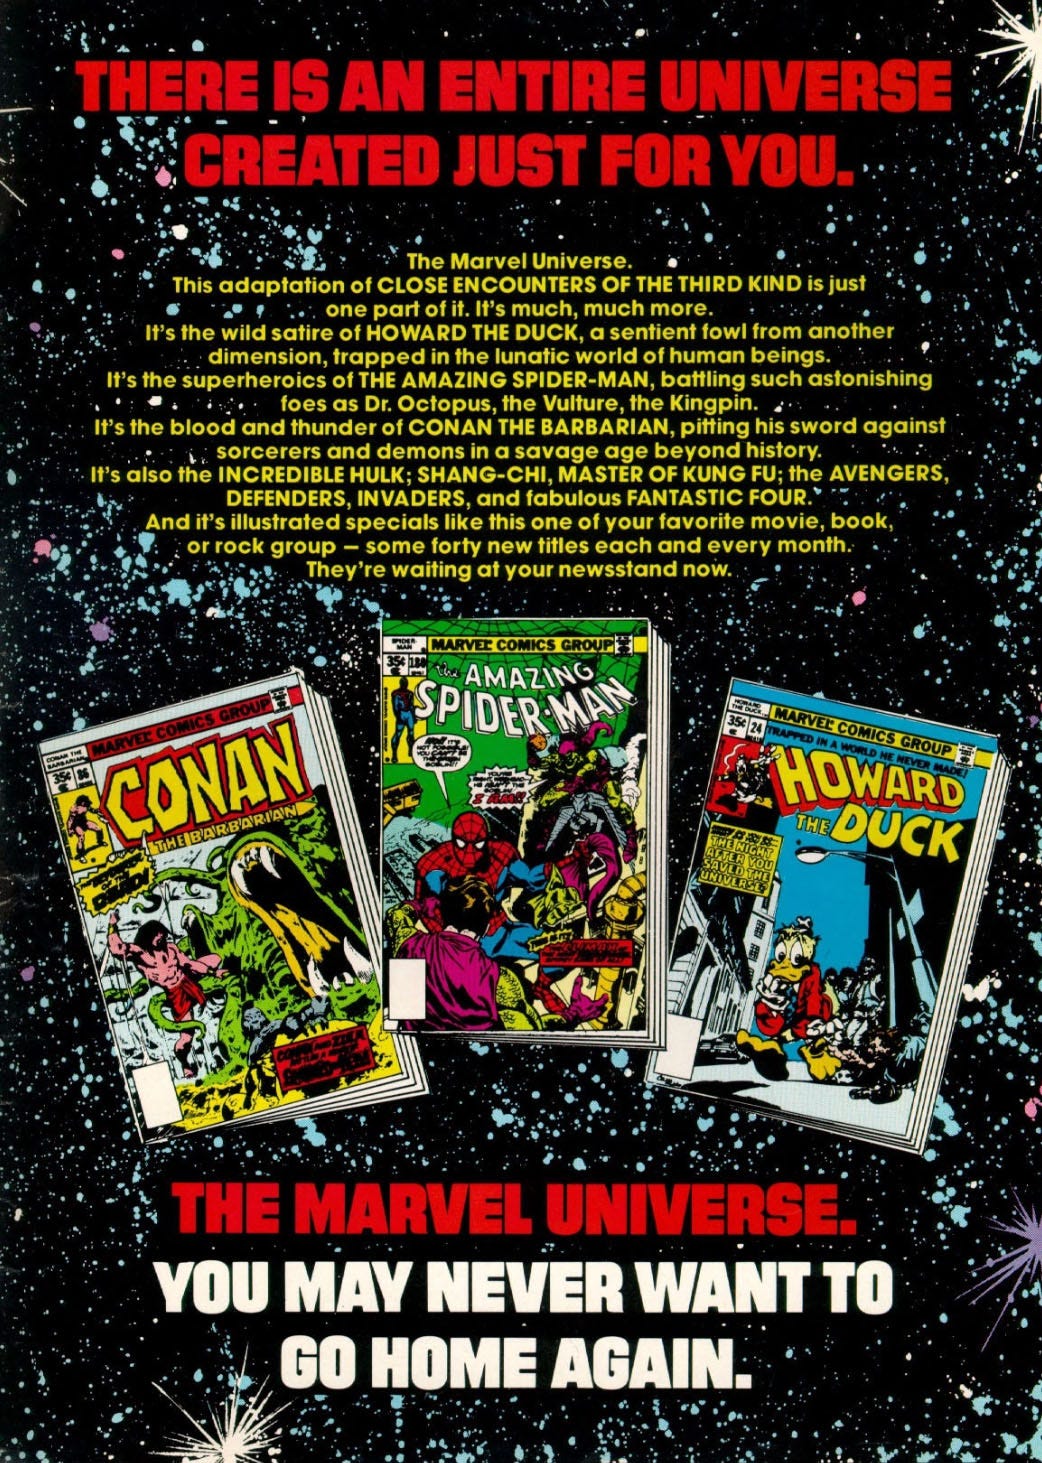 Ad, with text over an illustrated starfield, plus pictures of the covers of three comic books, Conan the Barbarian number 36, Amazing Spider-Man number 180, and Howard the Duck number 24. The text states, THERE IS AN ENTIRE UNIVERSE CREATED JUST FOR YOU. The Marvel Universe. This adaptation of CLOSE ENCOUNTERS OF THE THIRD KIND is just one part of it. It's much, much more. It's the wild satire of HOWARD THE DUCK, a sentient fowl from another dimension, trapped in the lunatic world of human beings. It's the superheroics of THE AMAZING SPIDER-MAN, battling such astonishing foes as Dr. Octopus, the Vulture, the Kingpin. It's the blood and thunder of CON AN THE BARBARIAN, pitting his sword against sorcerers and demons in a savage age beyond history. It's also the INCREDIBLE HULK; SHANG-CHI, MASTER OF KUNG FU; the AVENGERS, DEFENDERS, INVADERS, and fabulous FANTASTIC FOUR. And it's illustrated specials like this one of your favorite movie, book, or rock group - some forty new titles each and every month. They're waiting at your newsstand now. THE MARVEL UNIVERSE, YOU MAY NEVER WANT TO GO HOME AGAIN.